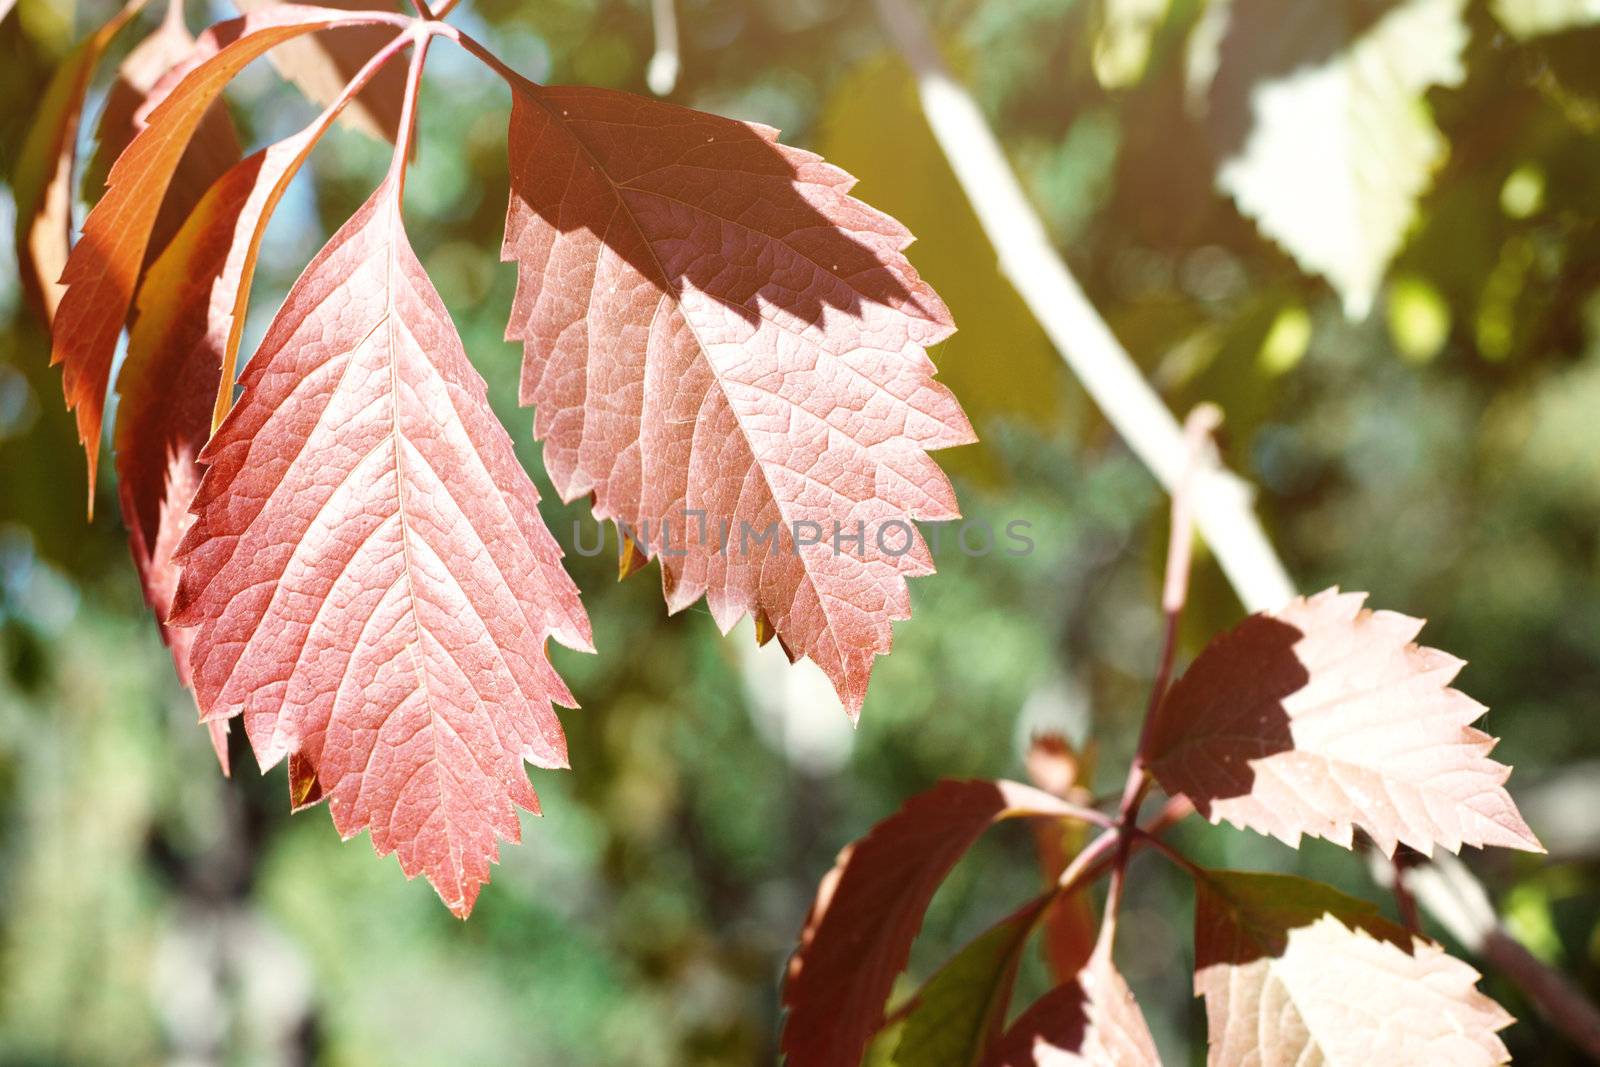 Close-up photo of the autumn red leaves. Natural light and colors